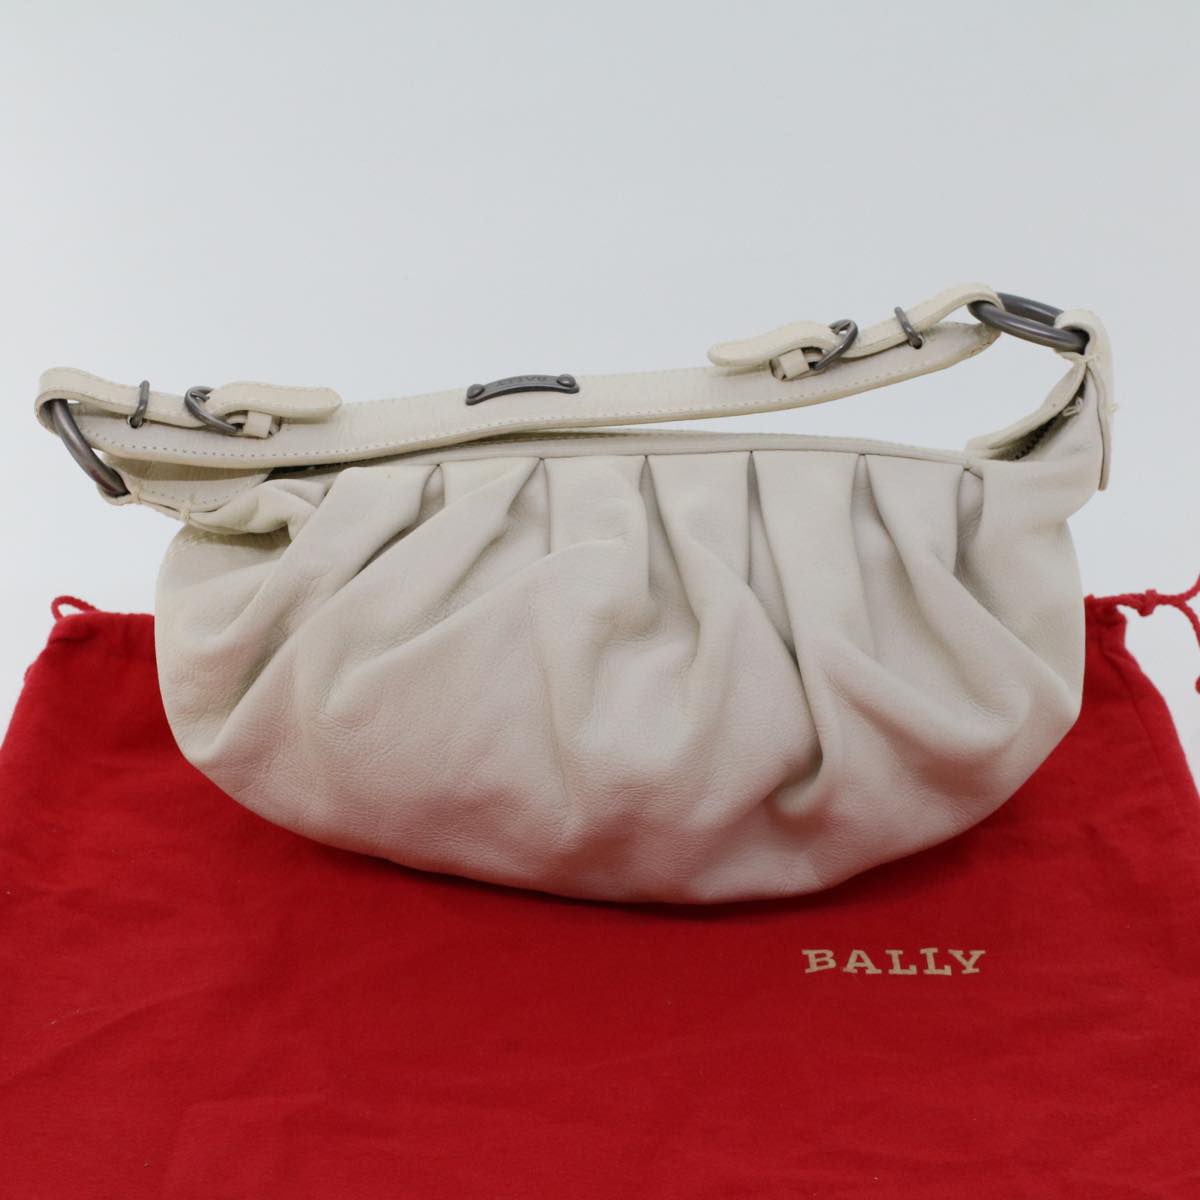 BALLY Shoulder Bag Leather White Auth bs6188